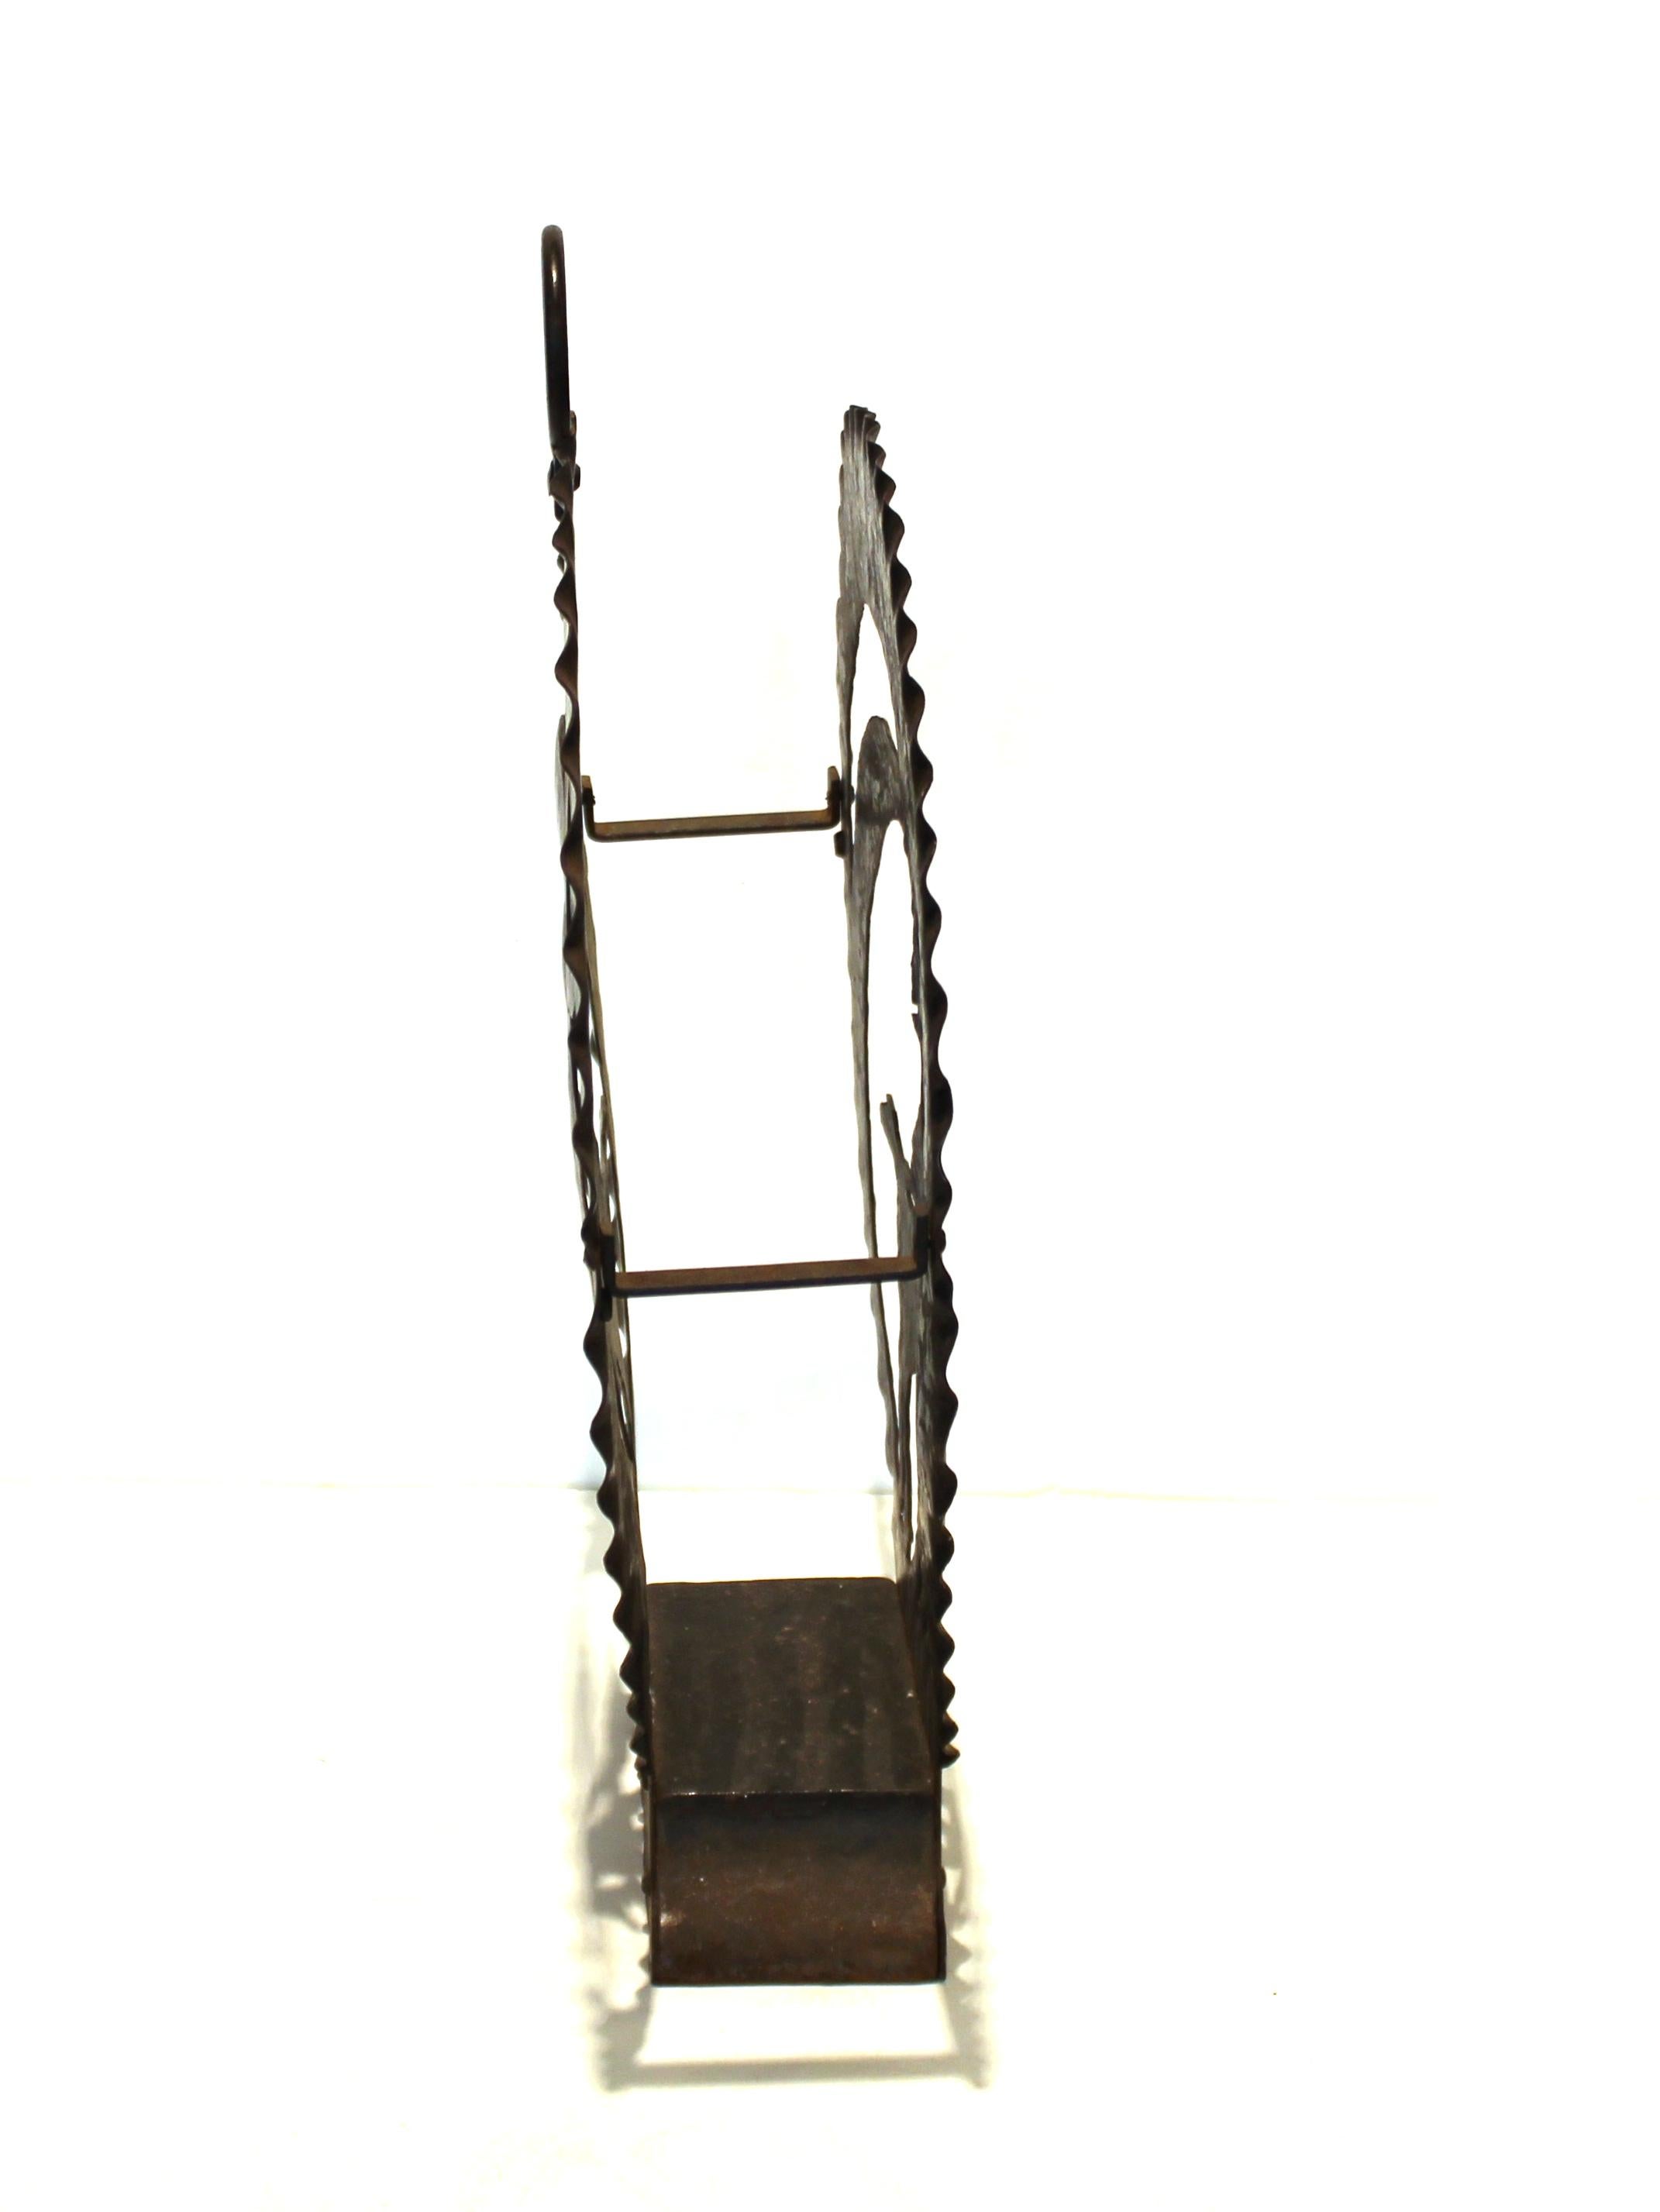 American Art Deco Wrought Iron and Cut Iron Magazine Rack In Good Condition For Sale In New York, NY